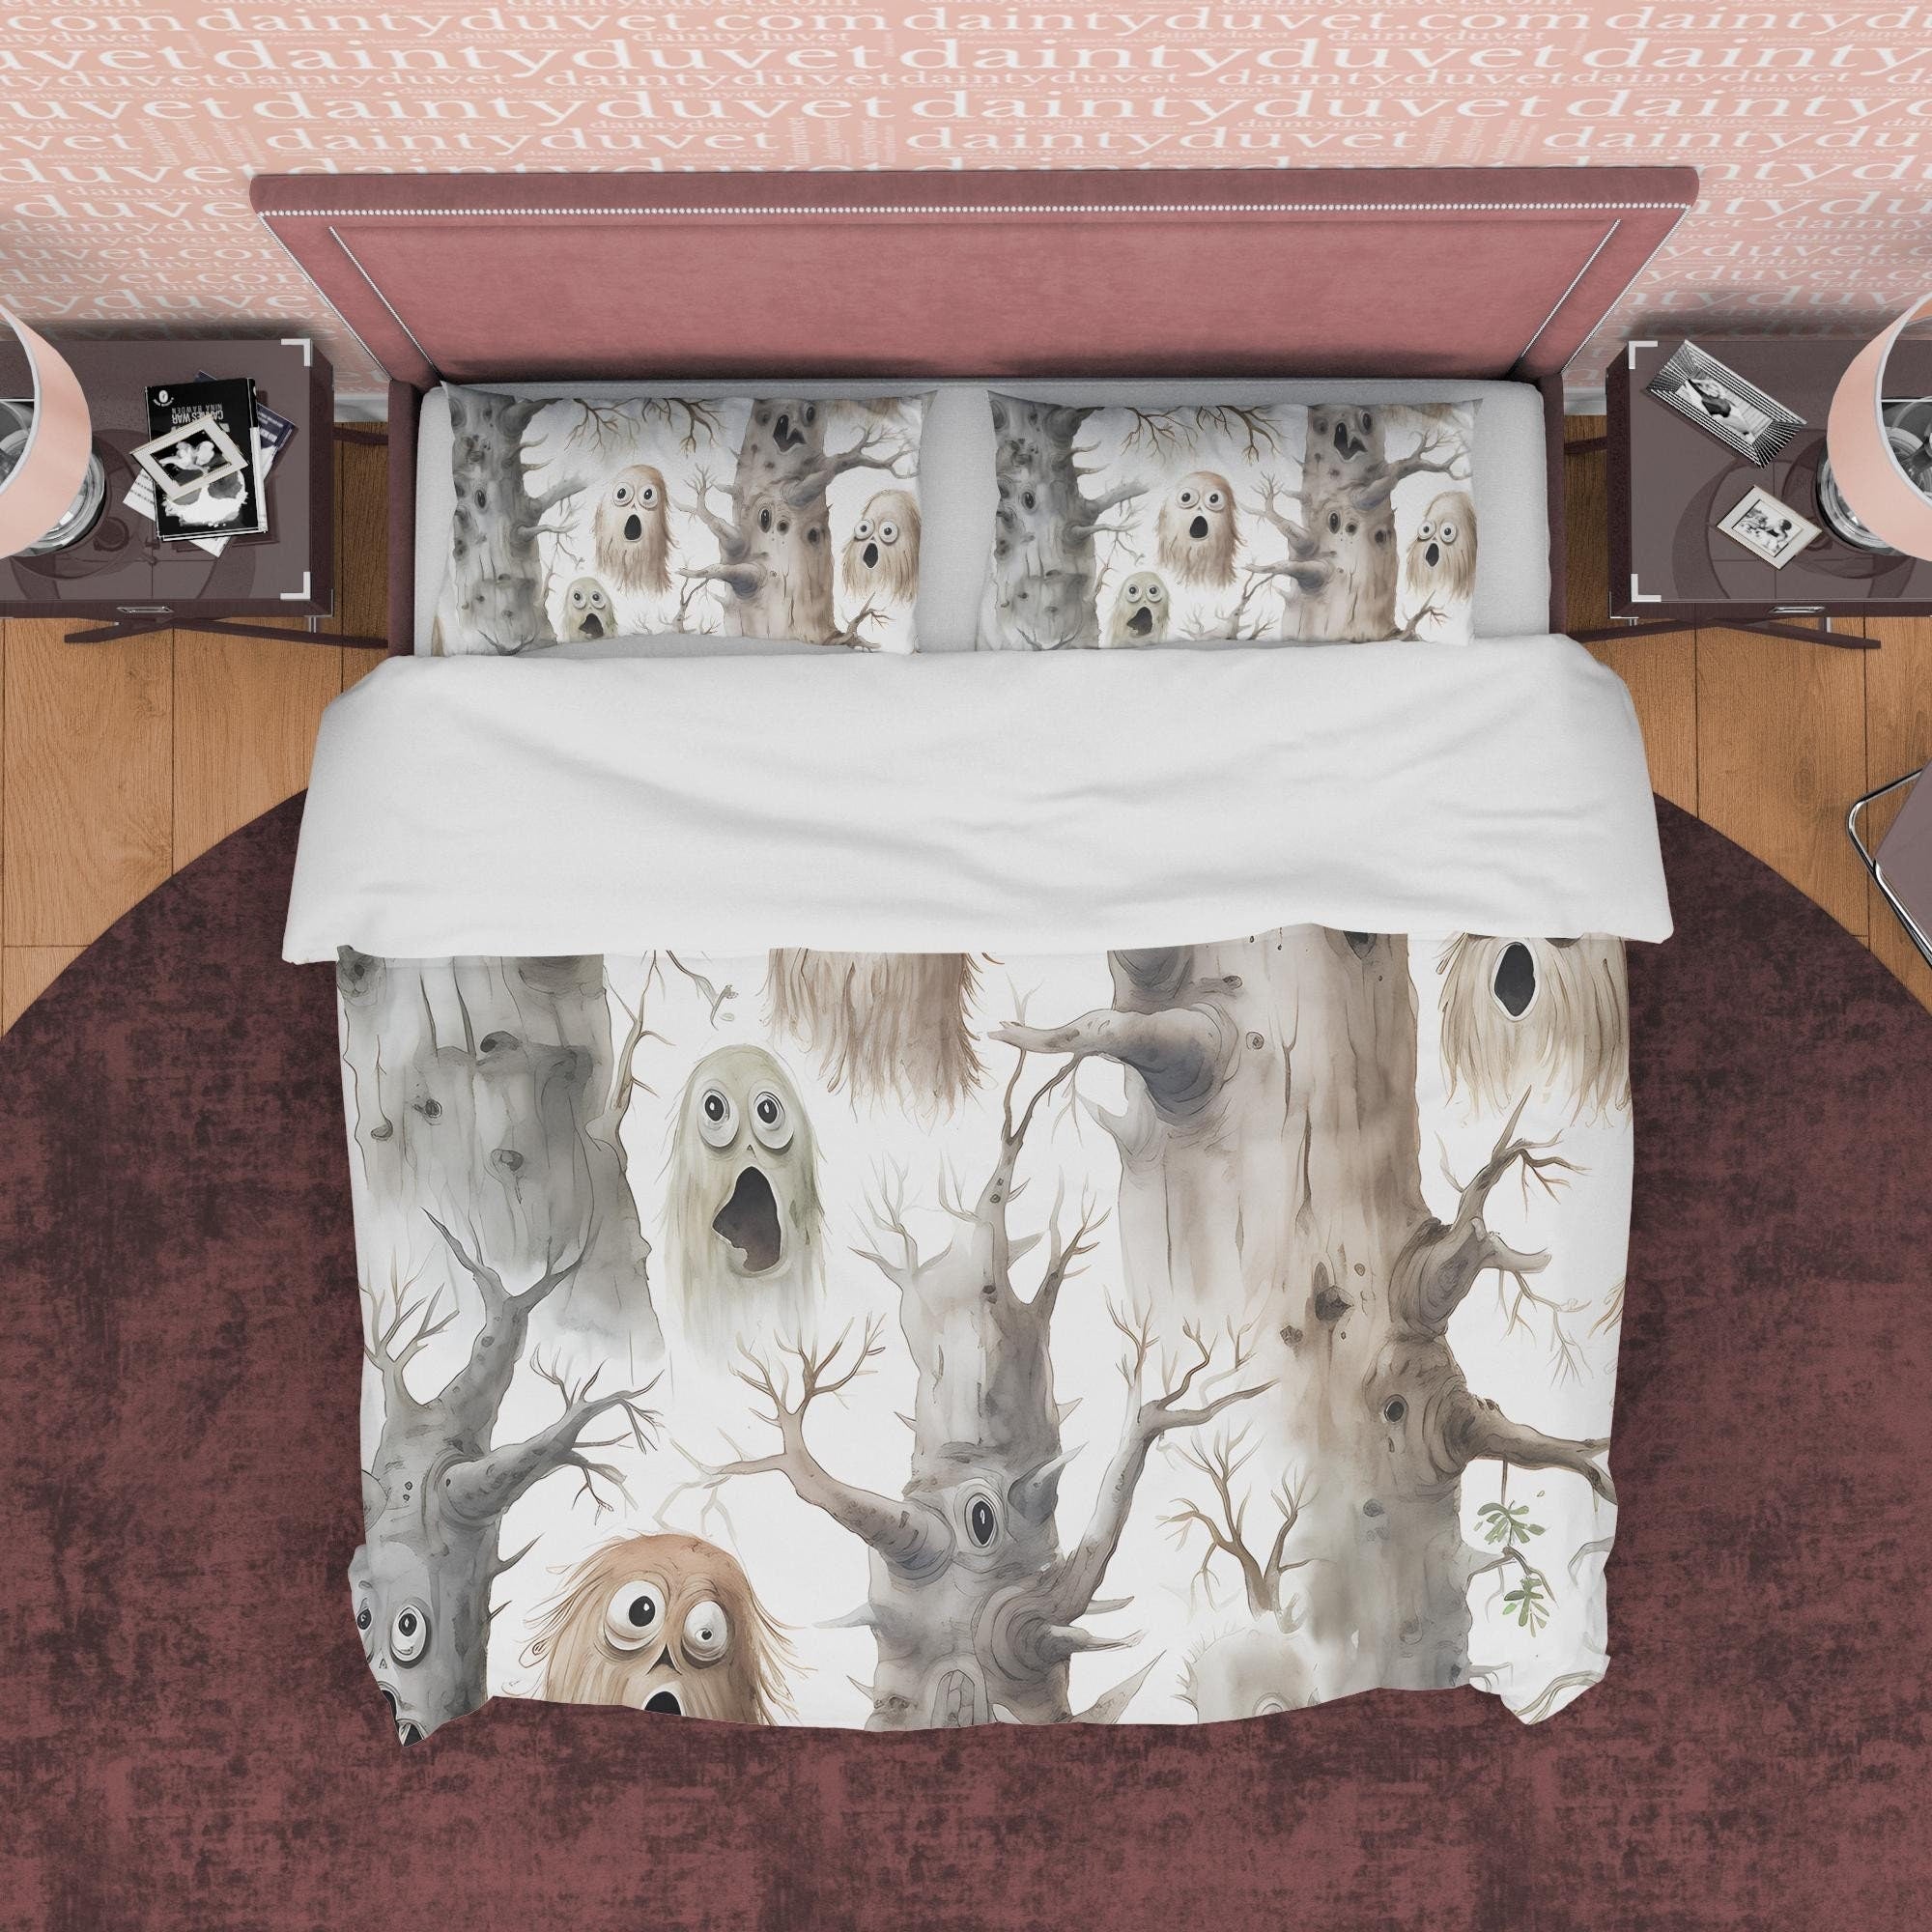 Haunted Forest Duvet Cover Set, Scary Tree Ghost Blanket Cover Aesthetic Zipper Bedding, Halloween Room Decor, White Spooky Print Bed Set